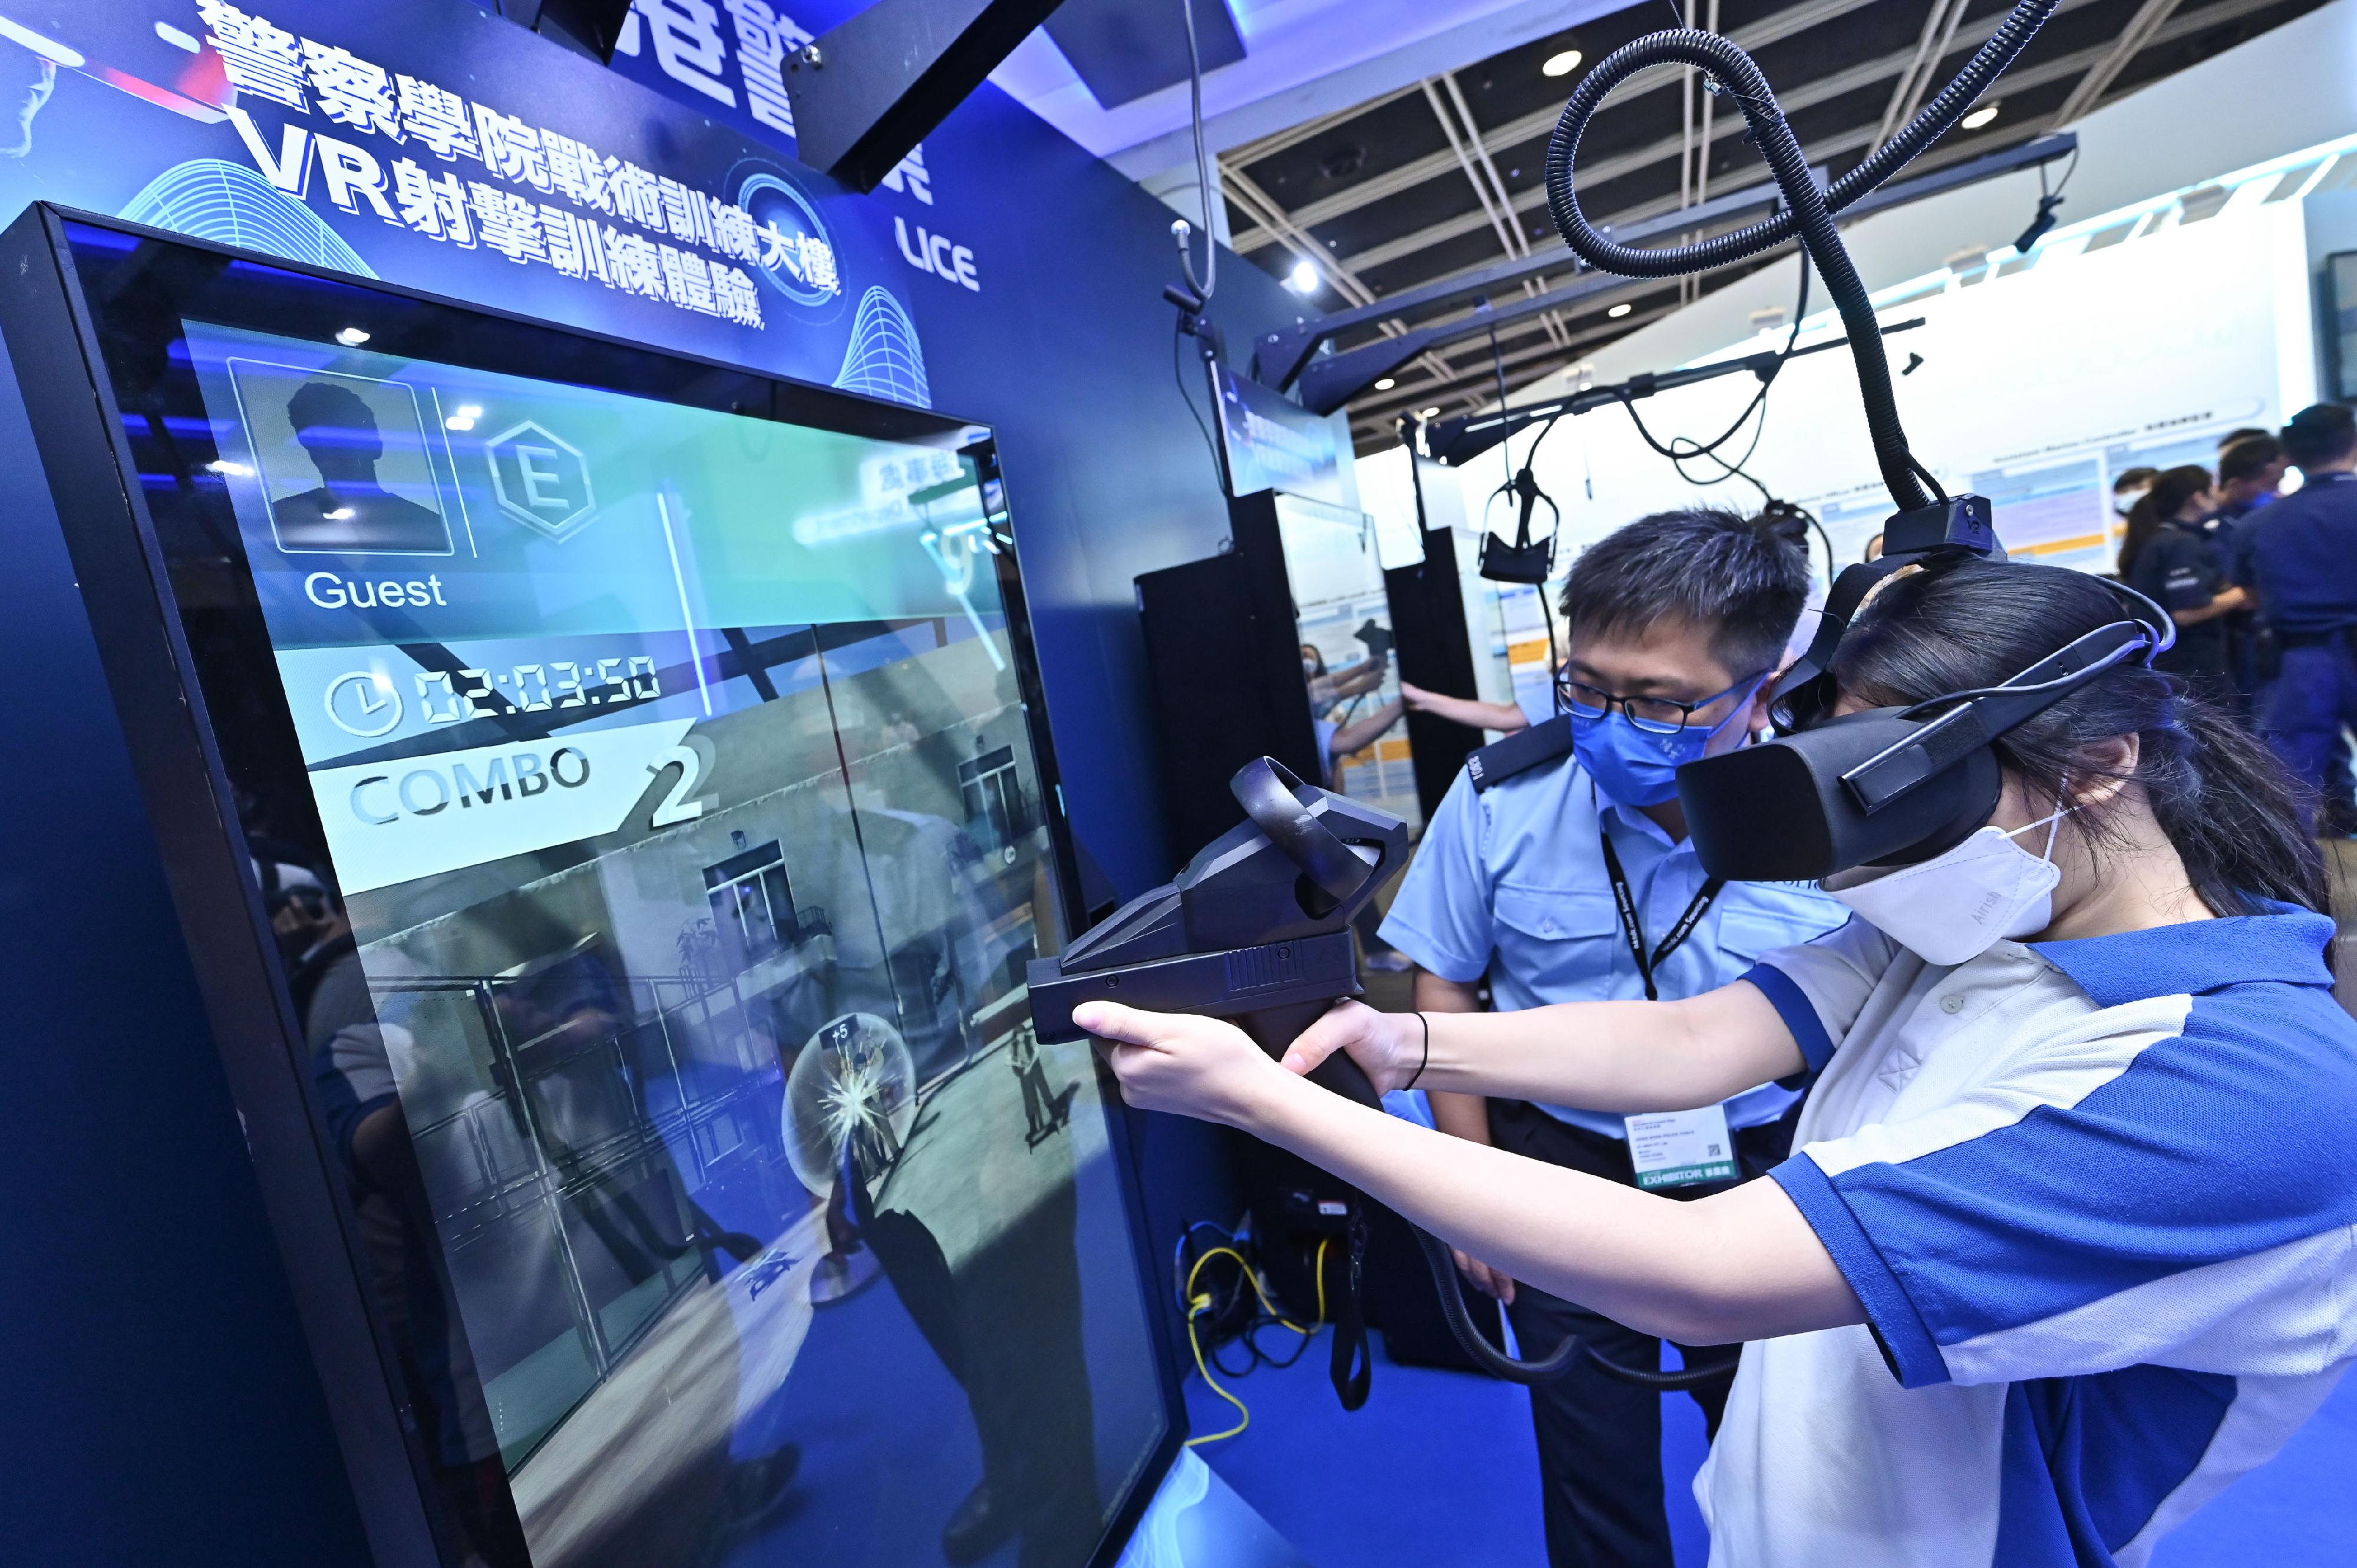 The Police Force introduces its work and provides recruitment information to visitors at the four-day Education and Careers Expo 2022 starting today (July 21). Photo shows a participant taking part in the immersive Virtual Reality simulated police firearms training.